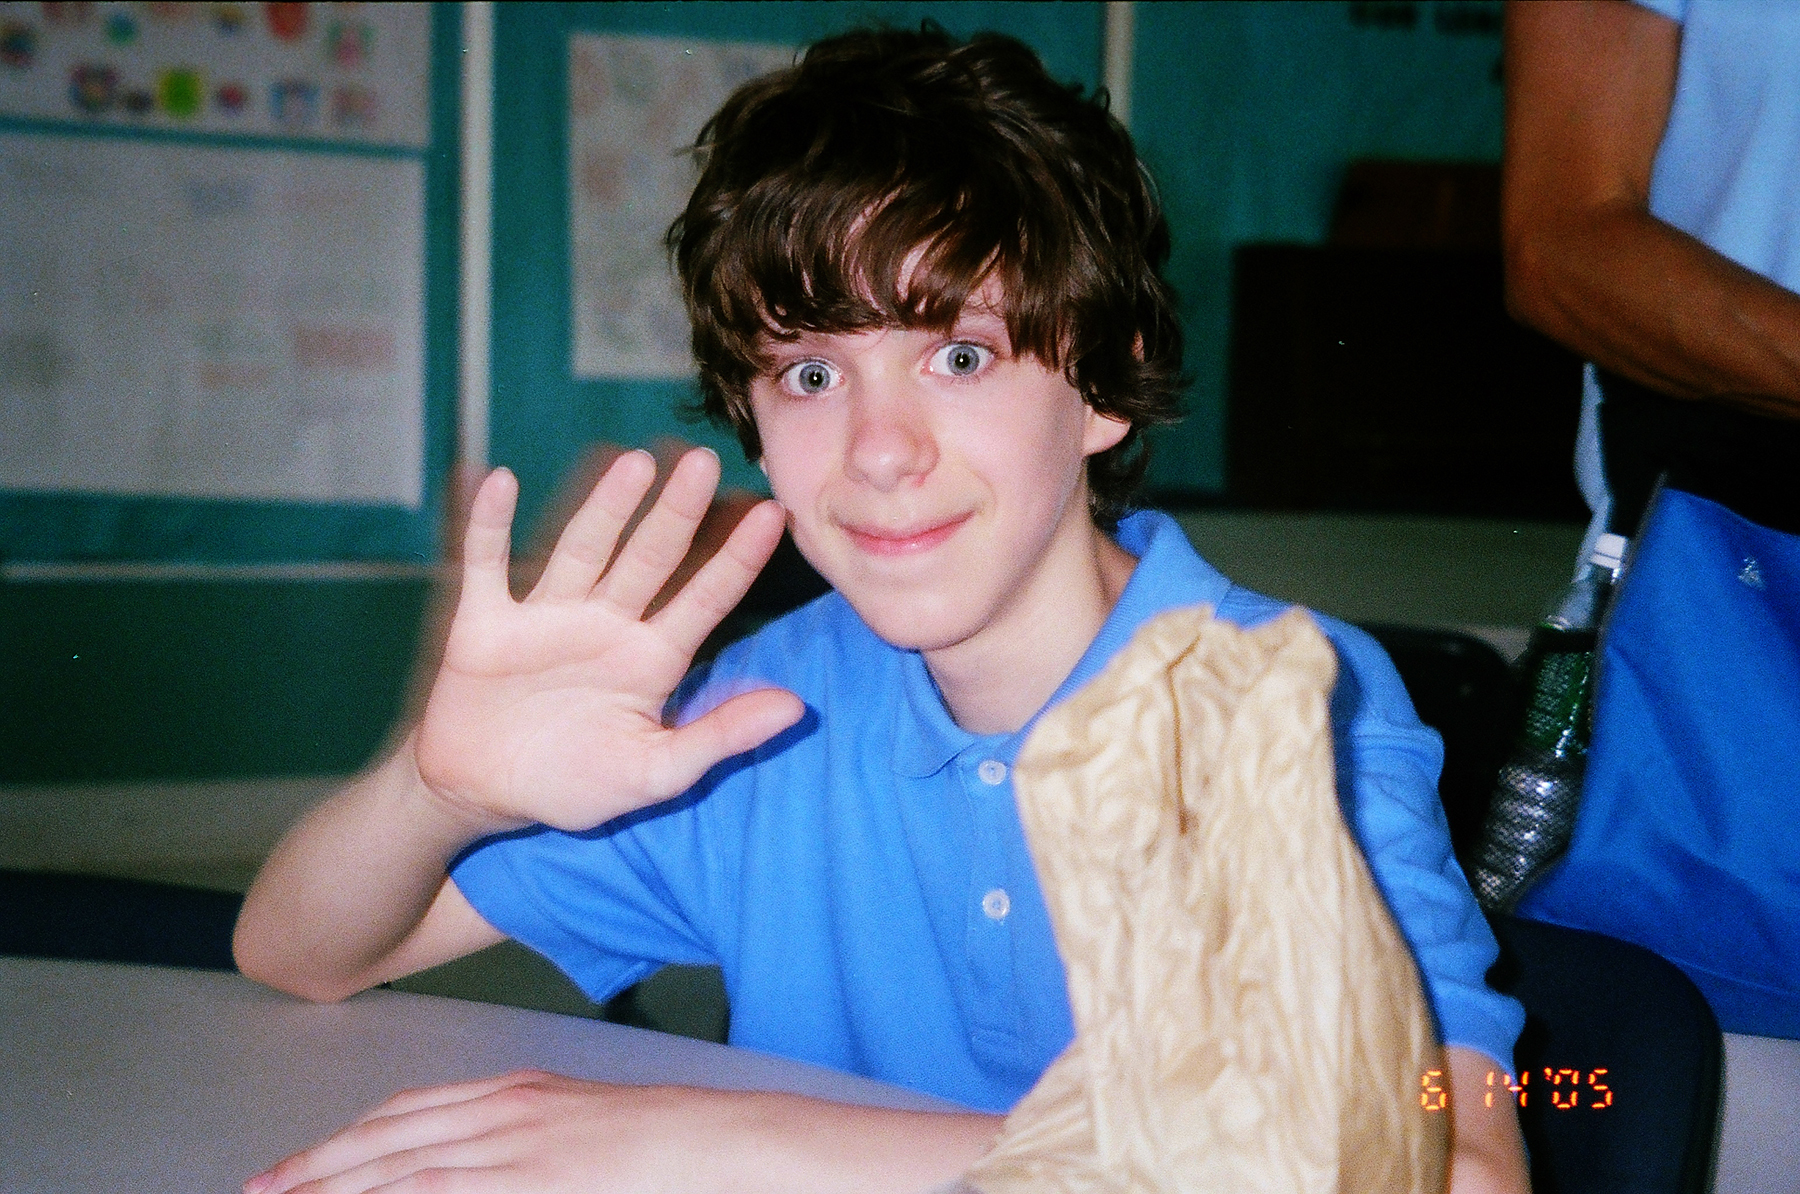 Adam Lanza pictured in a photograph from 2005 in Newtown, Conn. (Kateleen Foy—Getty Images)